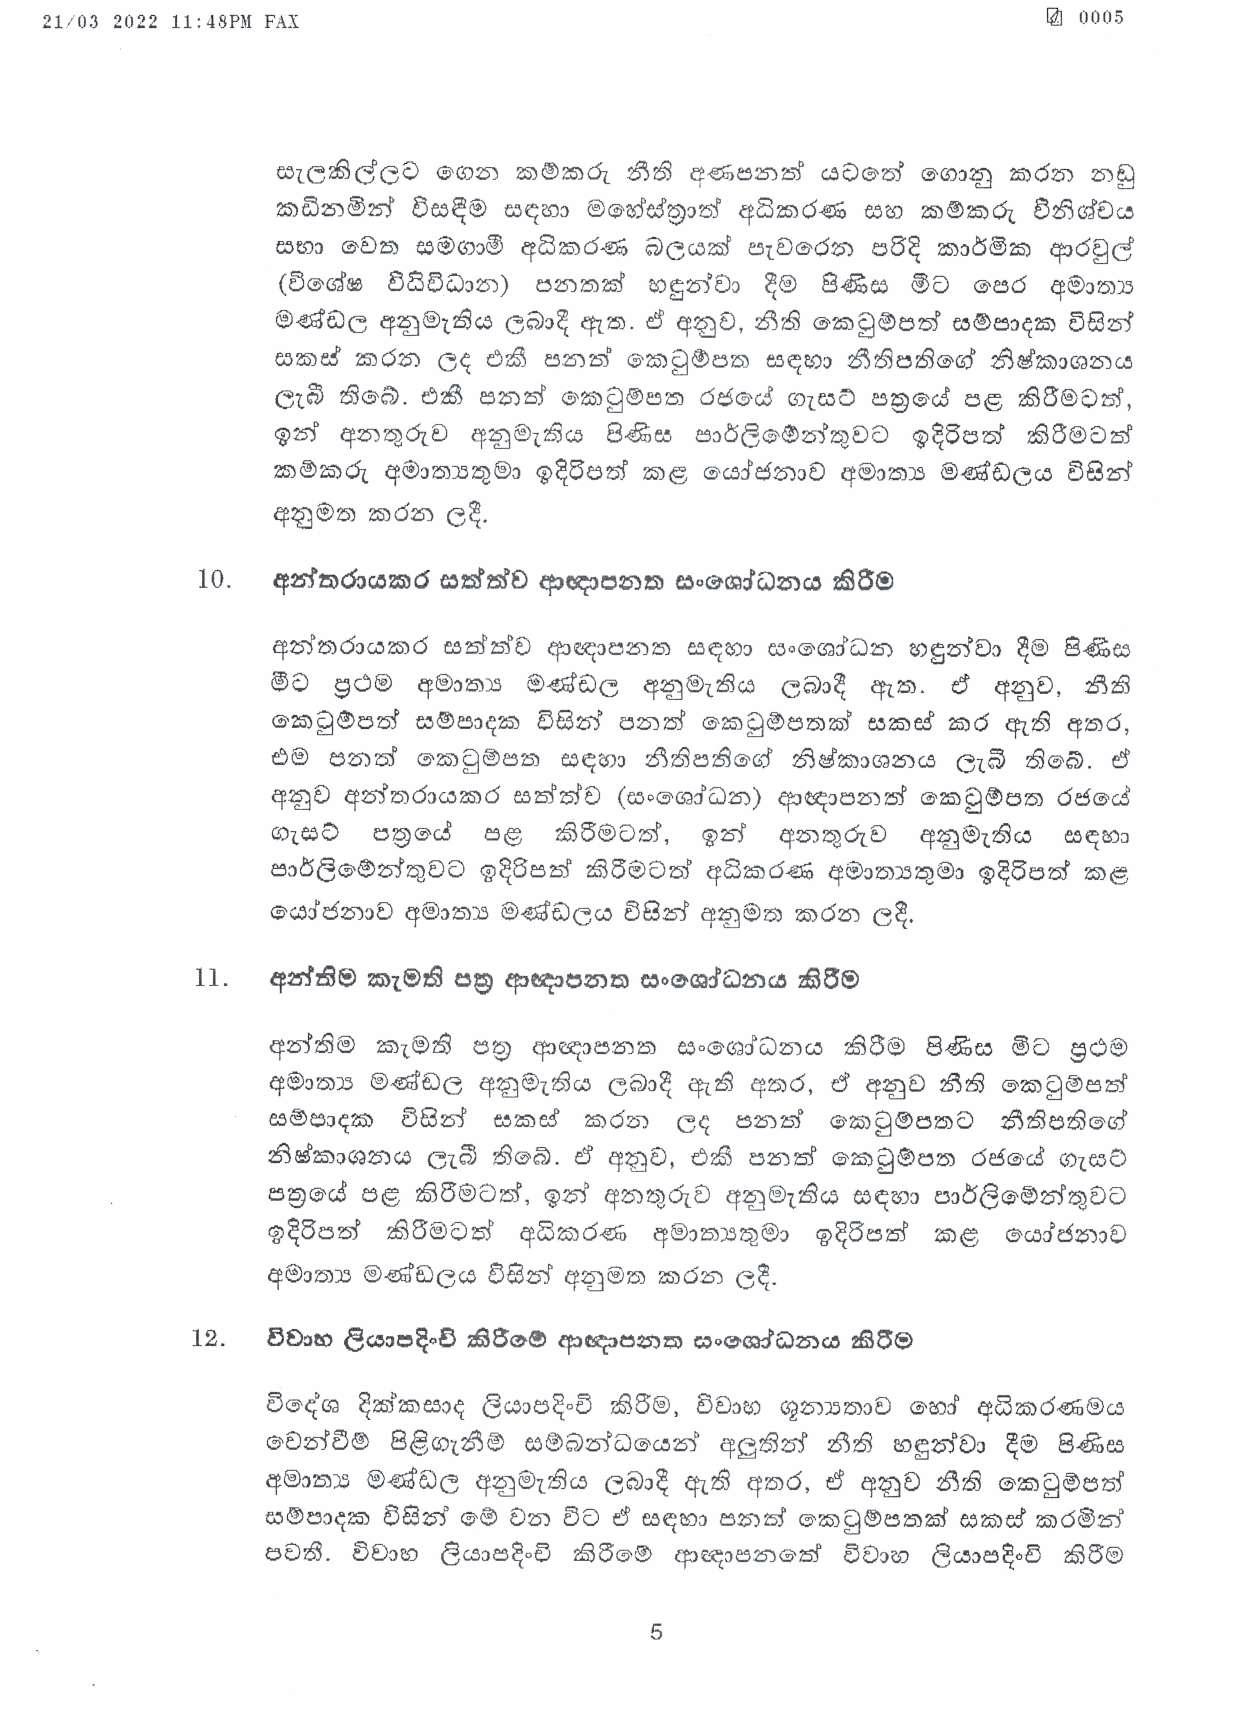 Cabinet Decisions on 21.03.2022 page 005